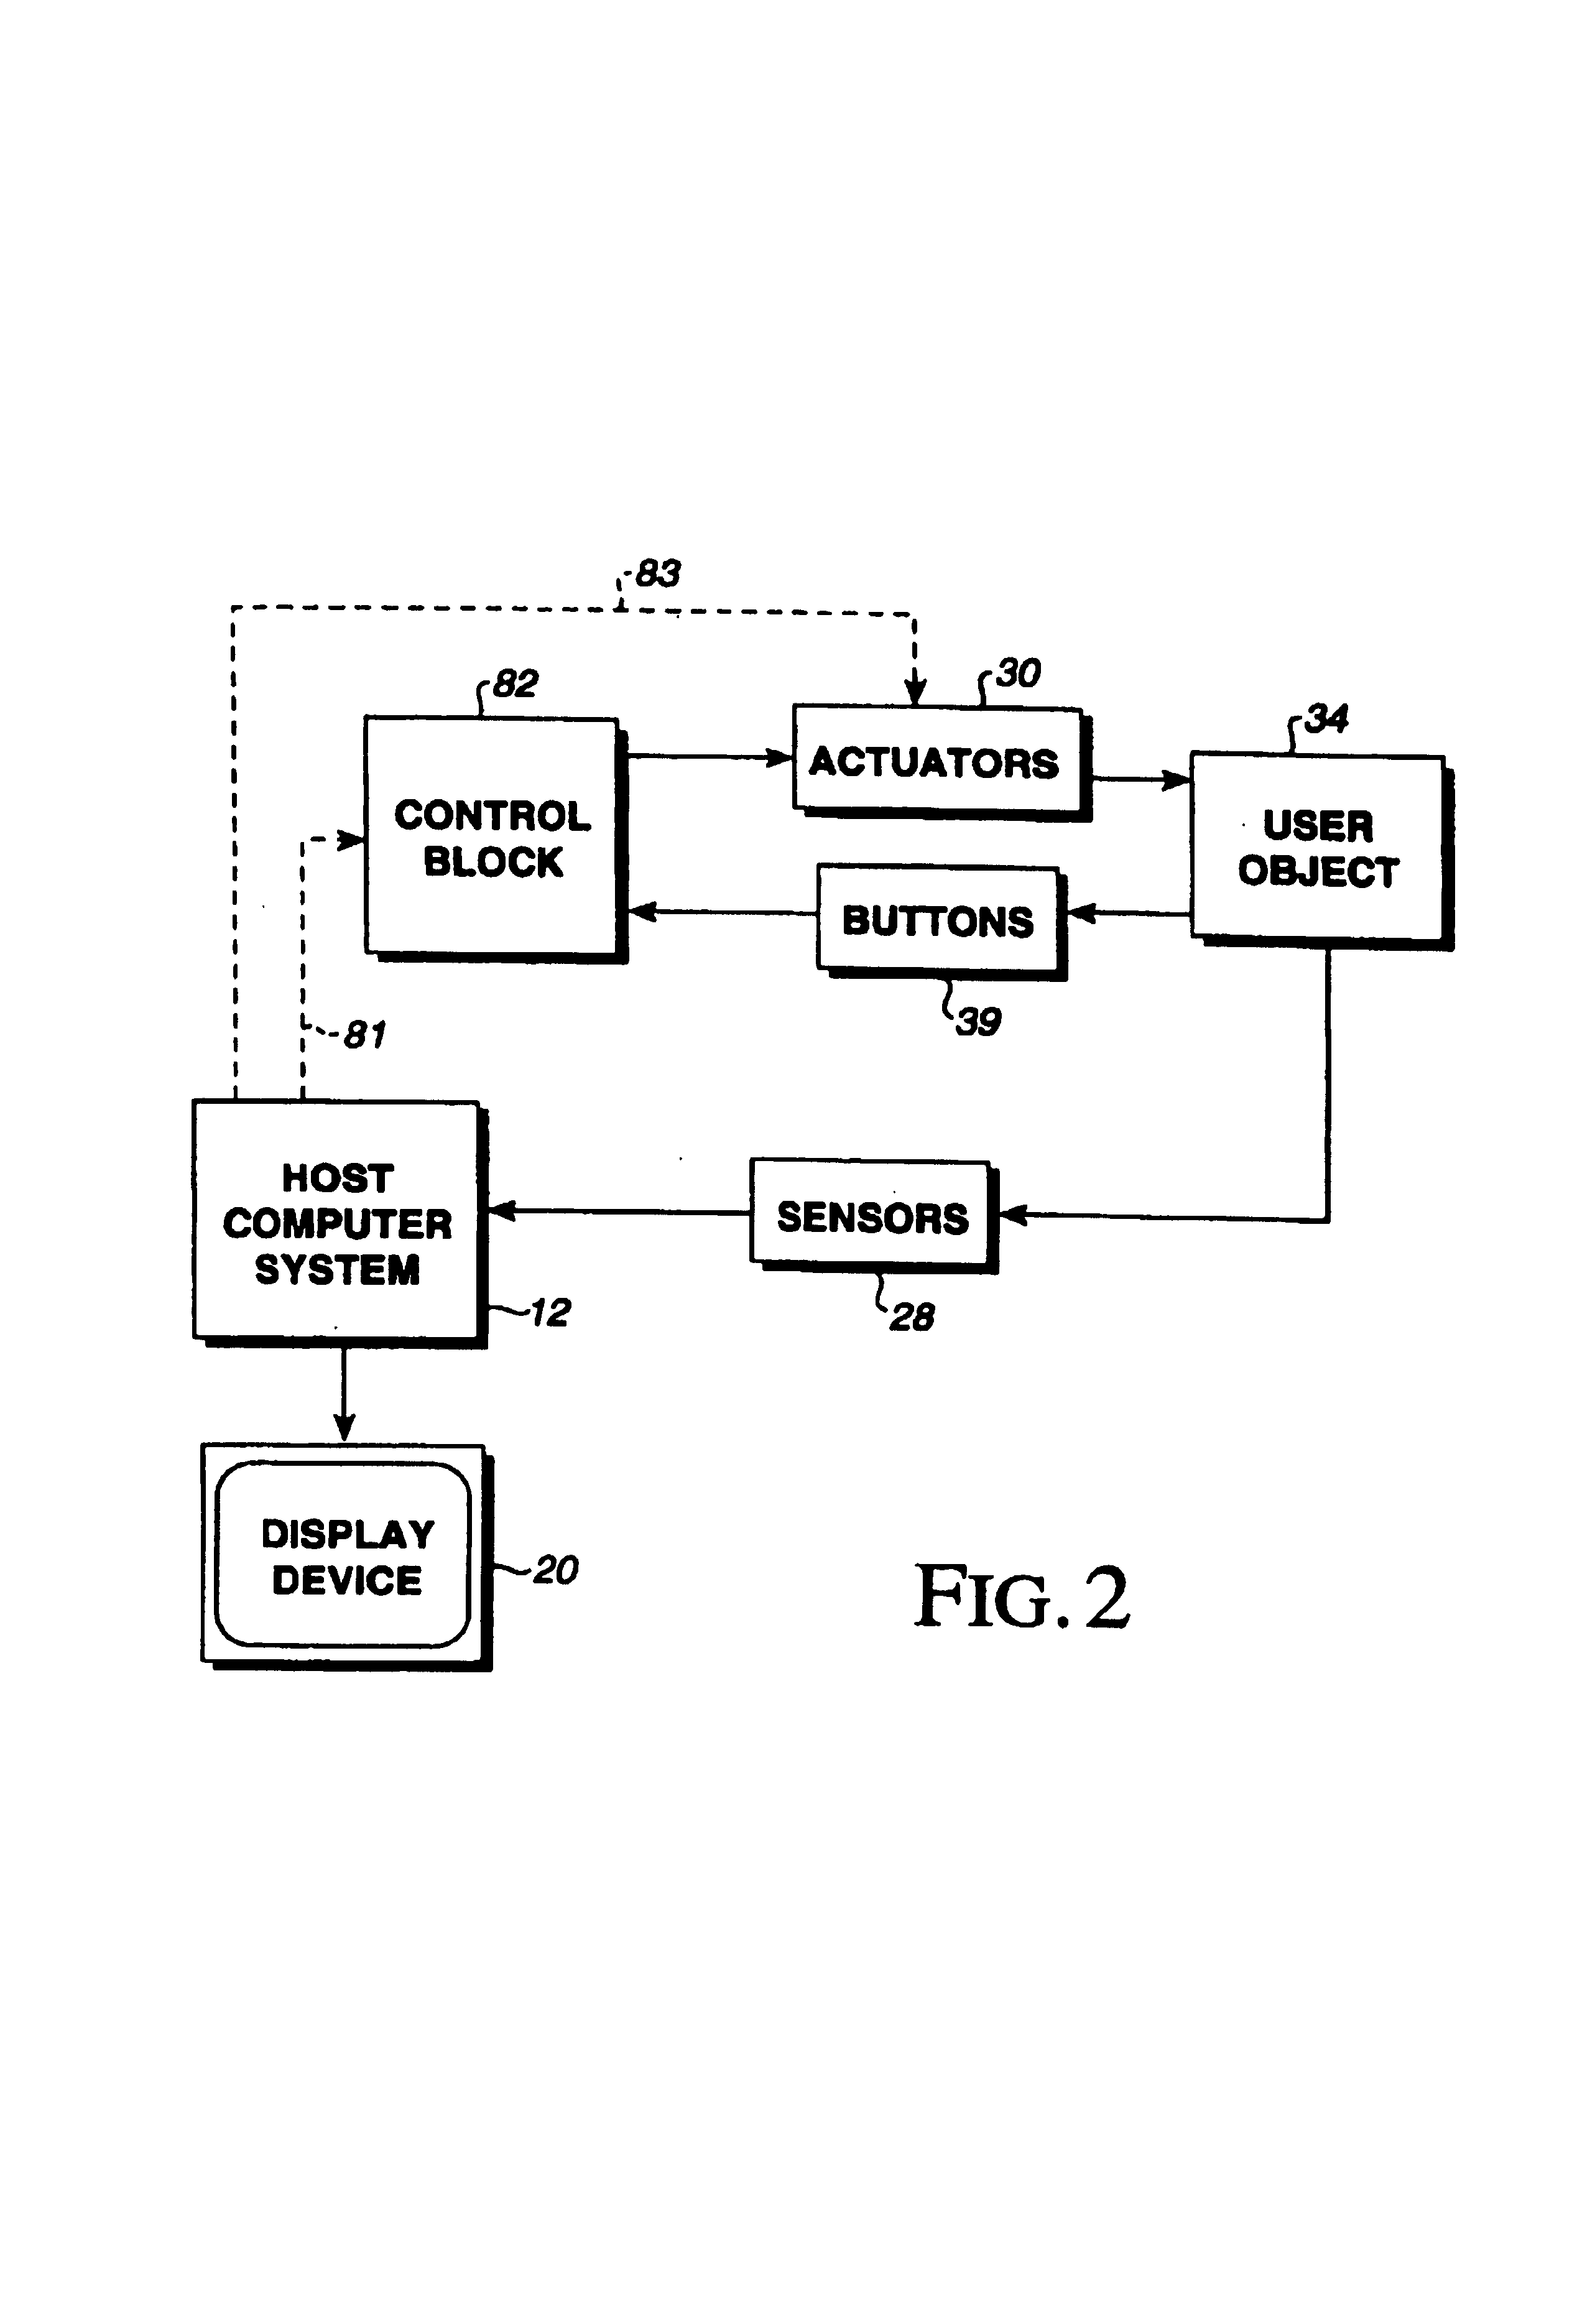 Method for providing high bandwidth force feedback with improved actuator feel